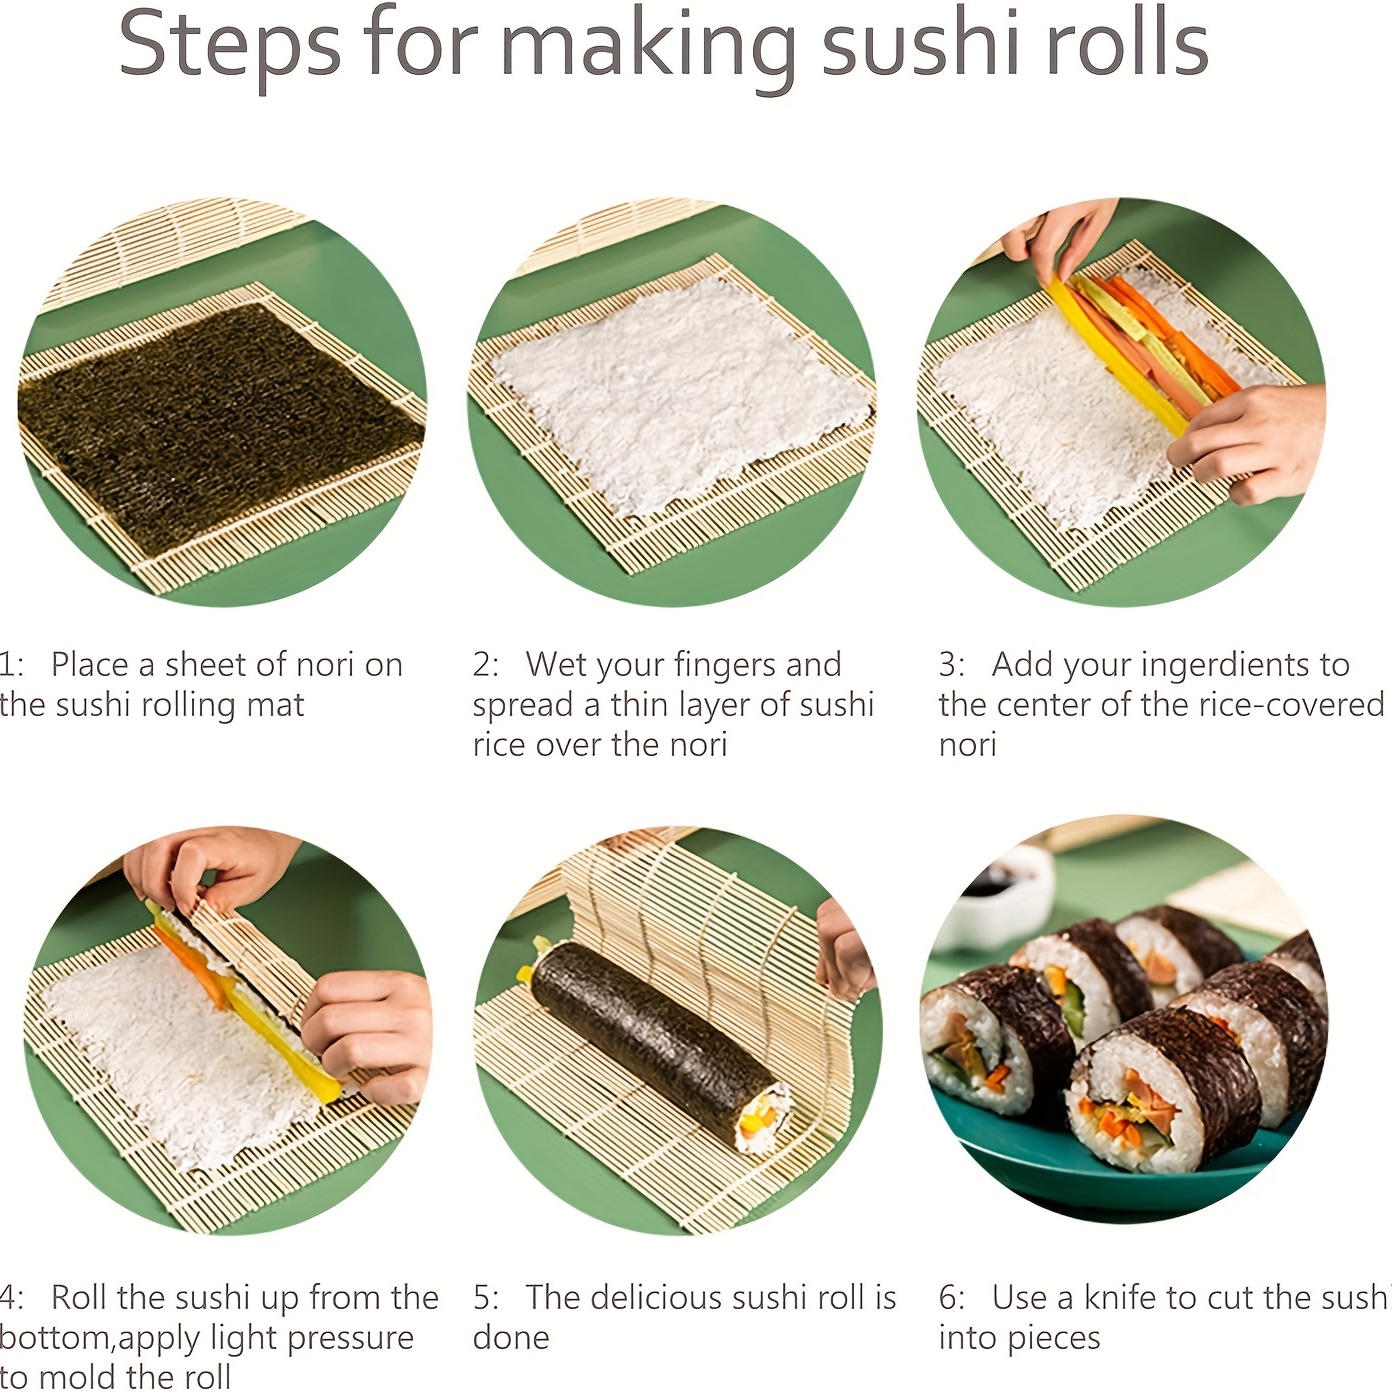 Sushi Making Kit, Sushi Roller Set, All In One Sushi Maker Kit, With Bamboo  Rolling Mat, Sushi Bazooka, Chopsticks Holders, Rice Paddle, Avocado Slicer  For Beginners, Family, Friends, Home, Kitchen Stuff, 